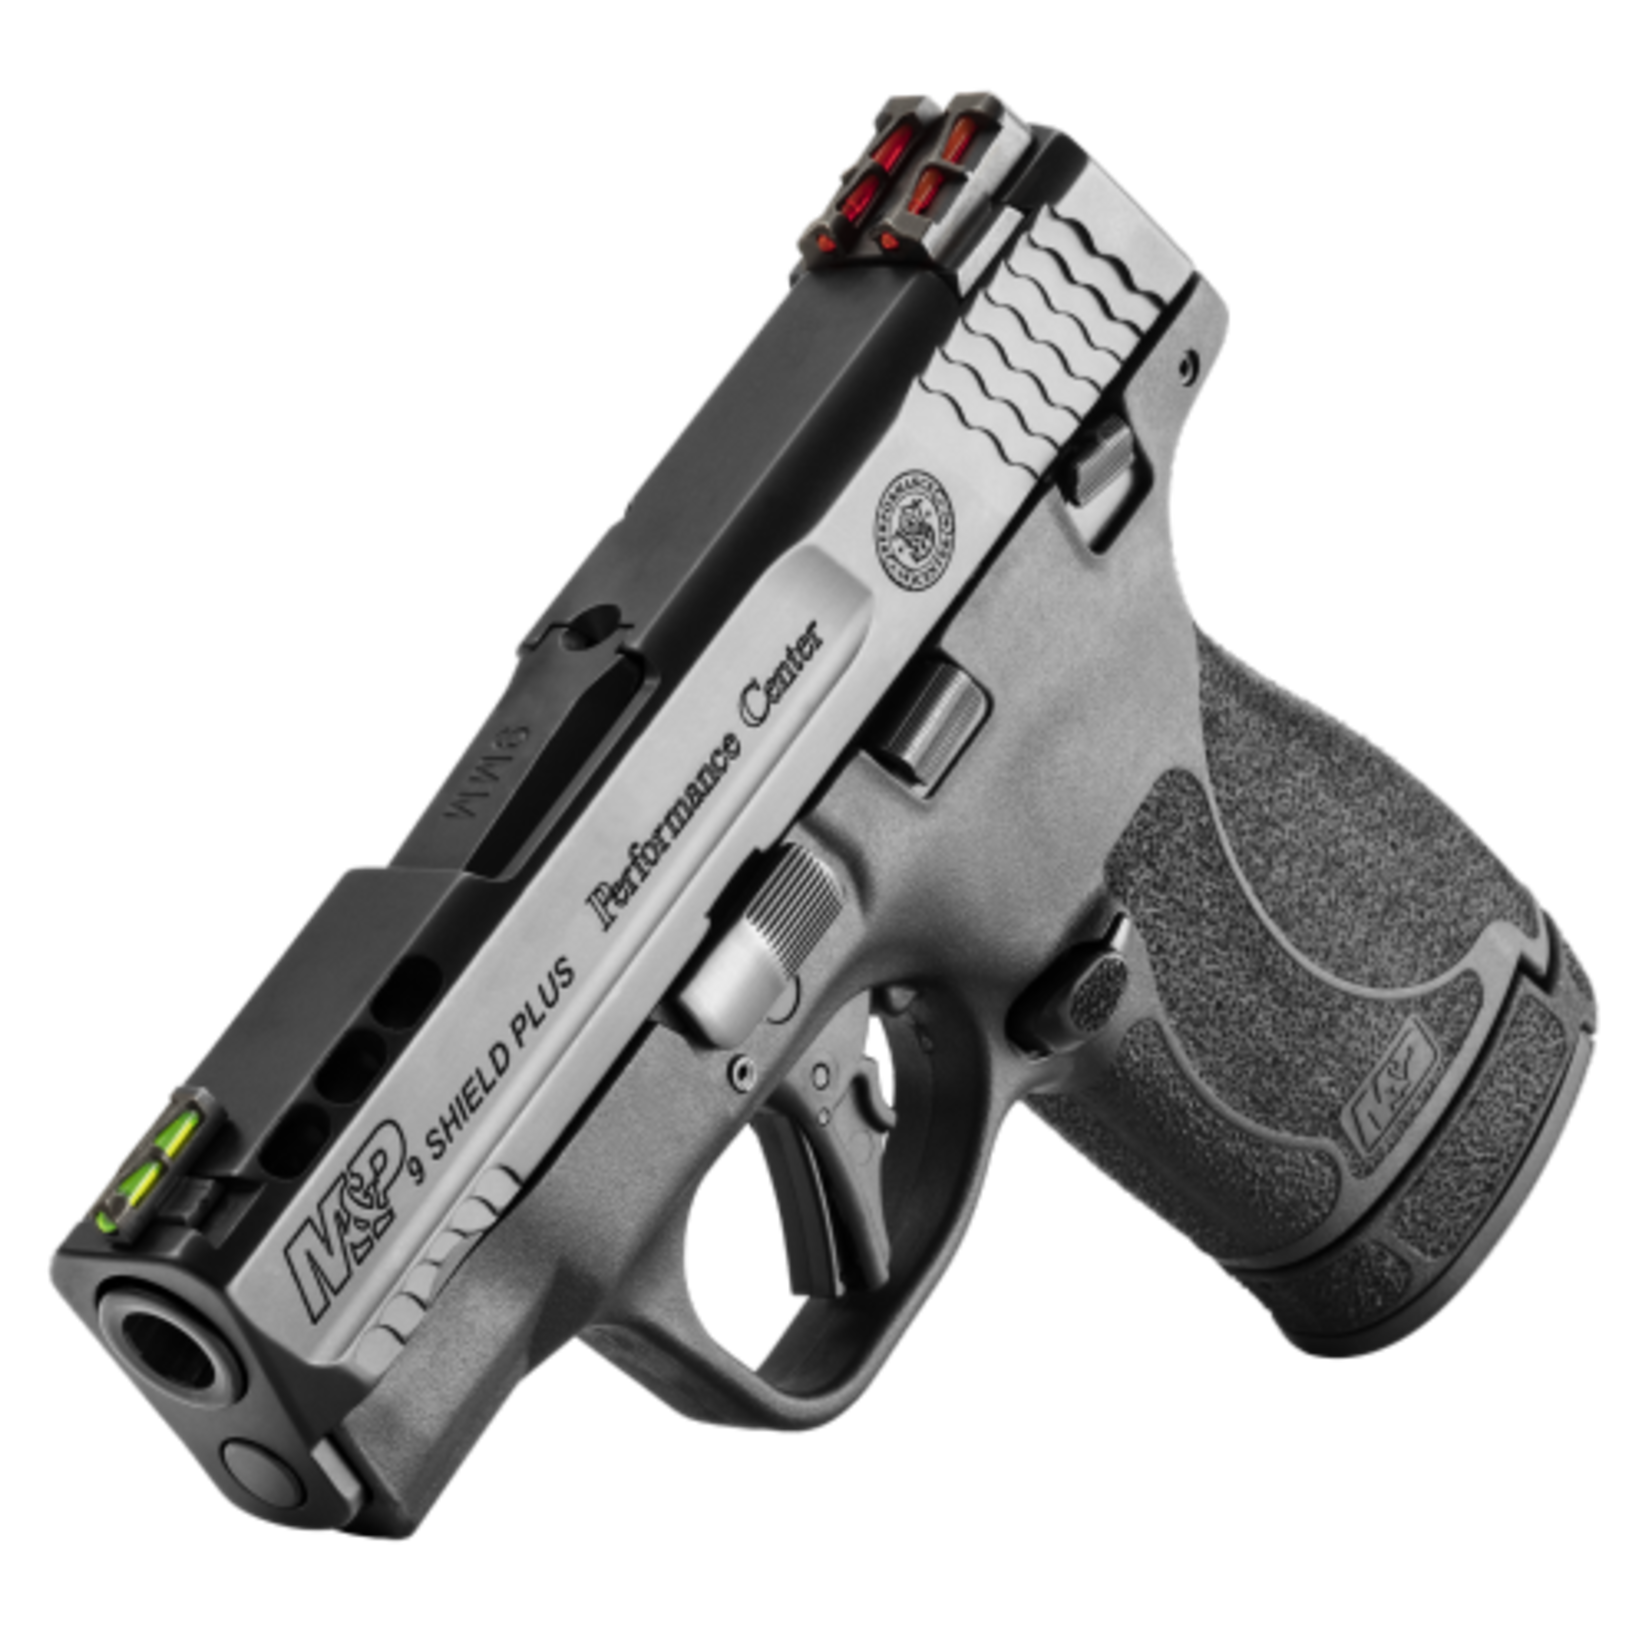 Smith and Wesson S&W M&P9 Shield Plus Performance Center - 13rnd - HiViz Sights - Everyday Carry Kit